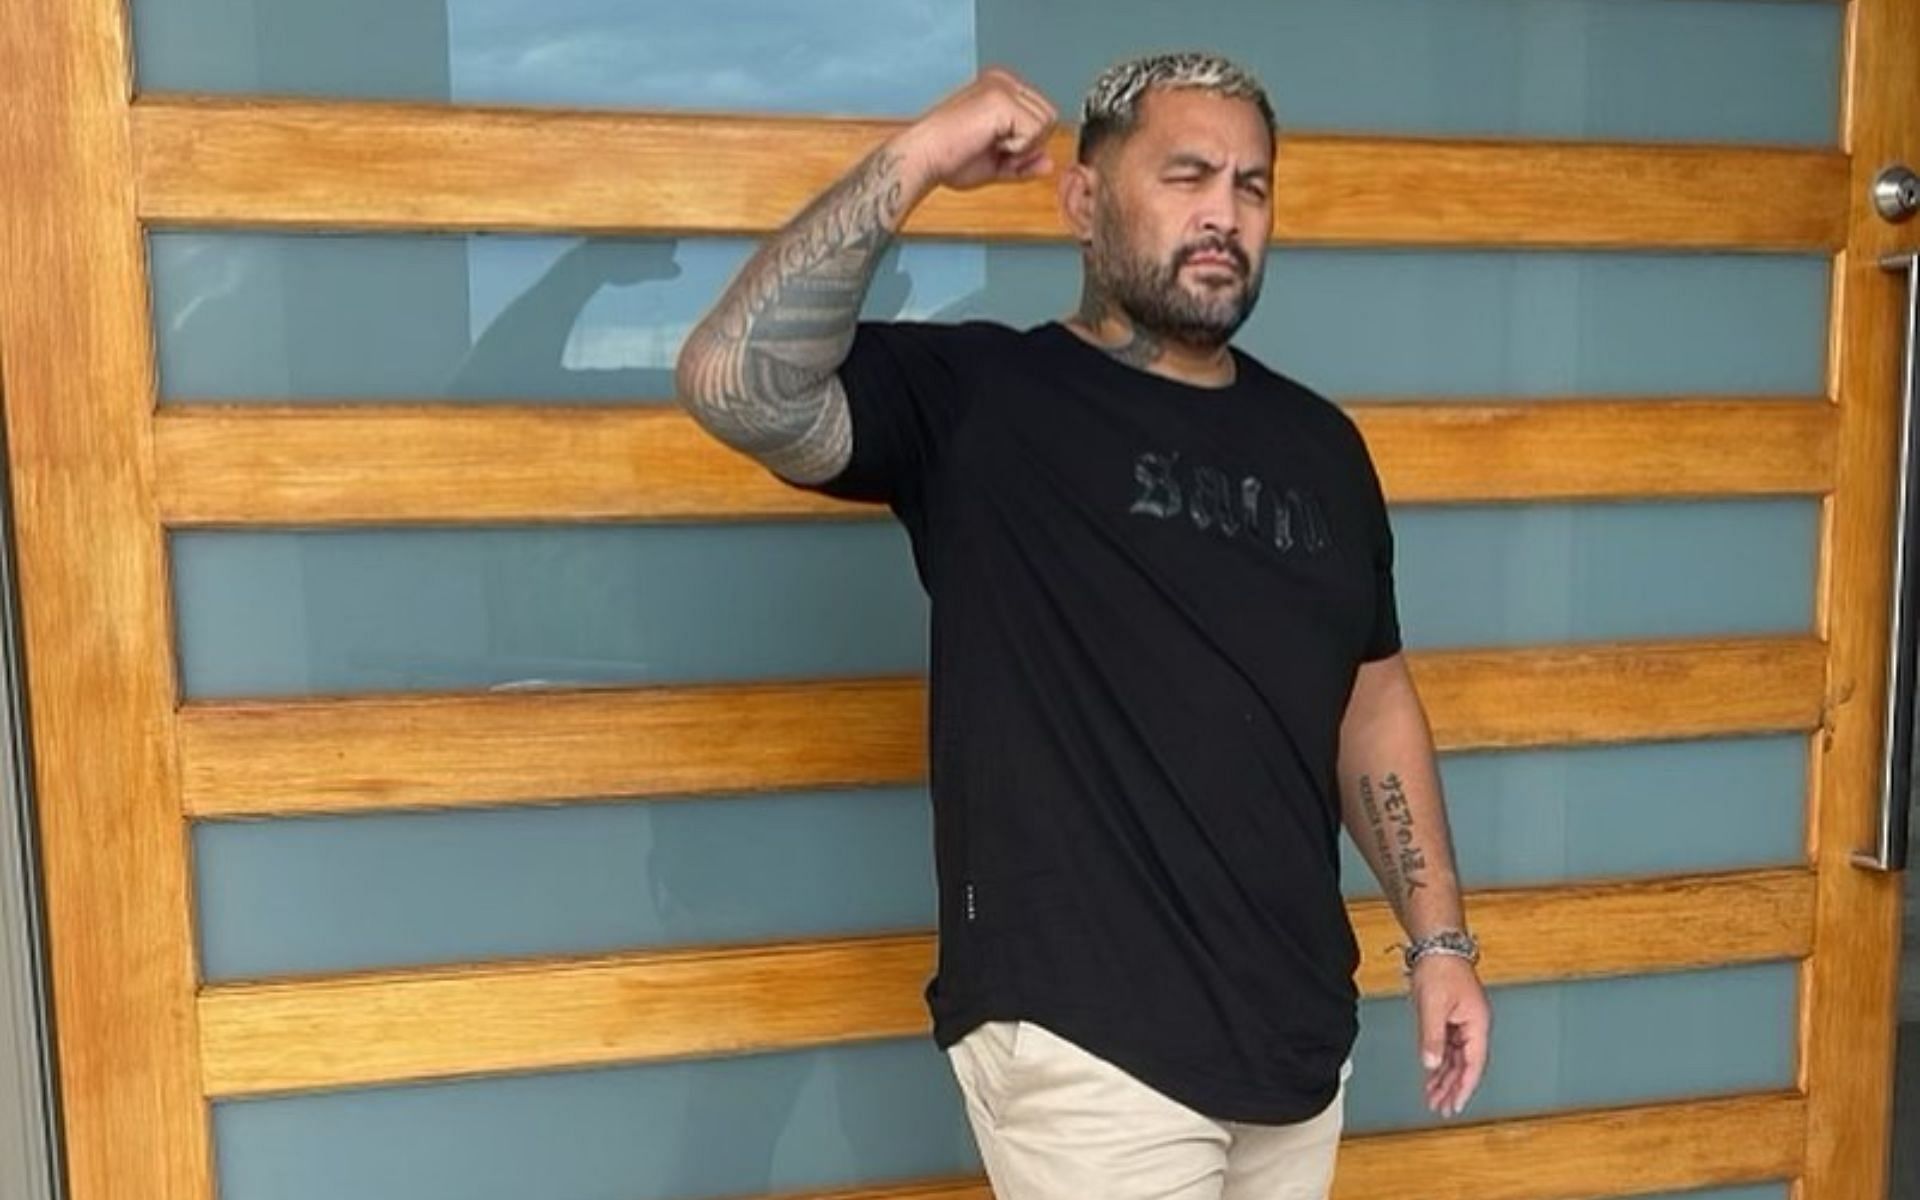 Mark Hunt unsurprisingly hit out at the UFC after the announcement of their split with USADA [Image Credit: @markhuntfighter74 on Instagram]